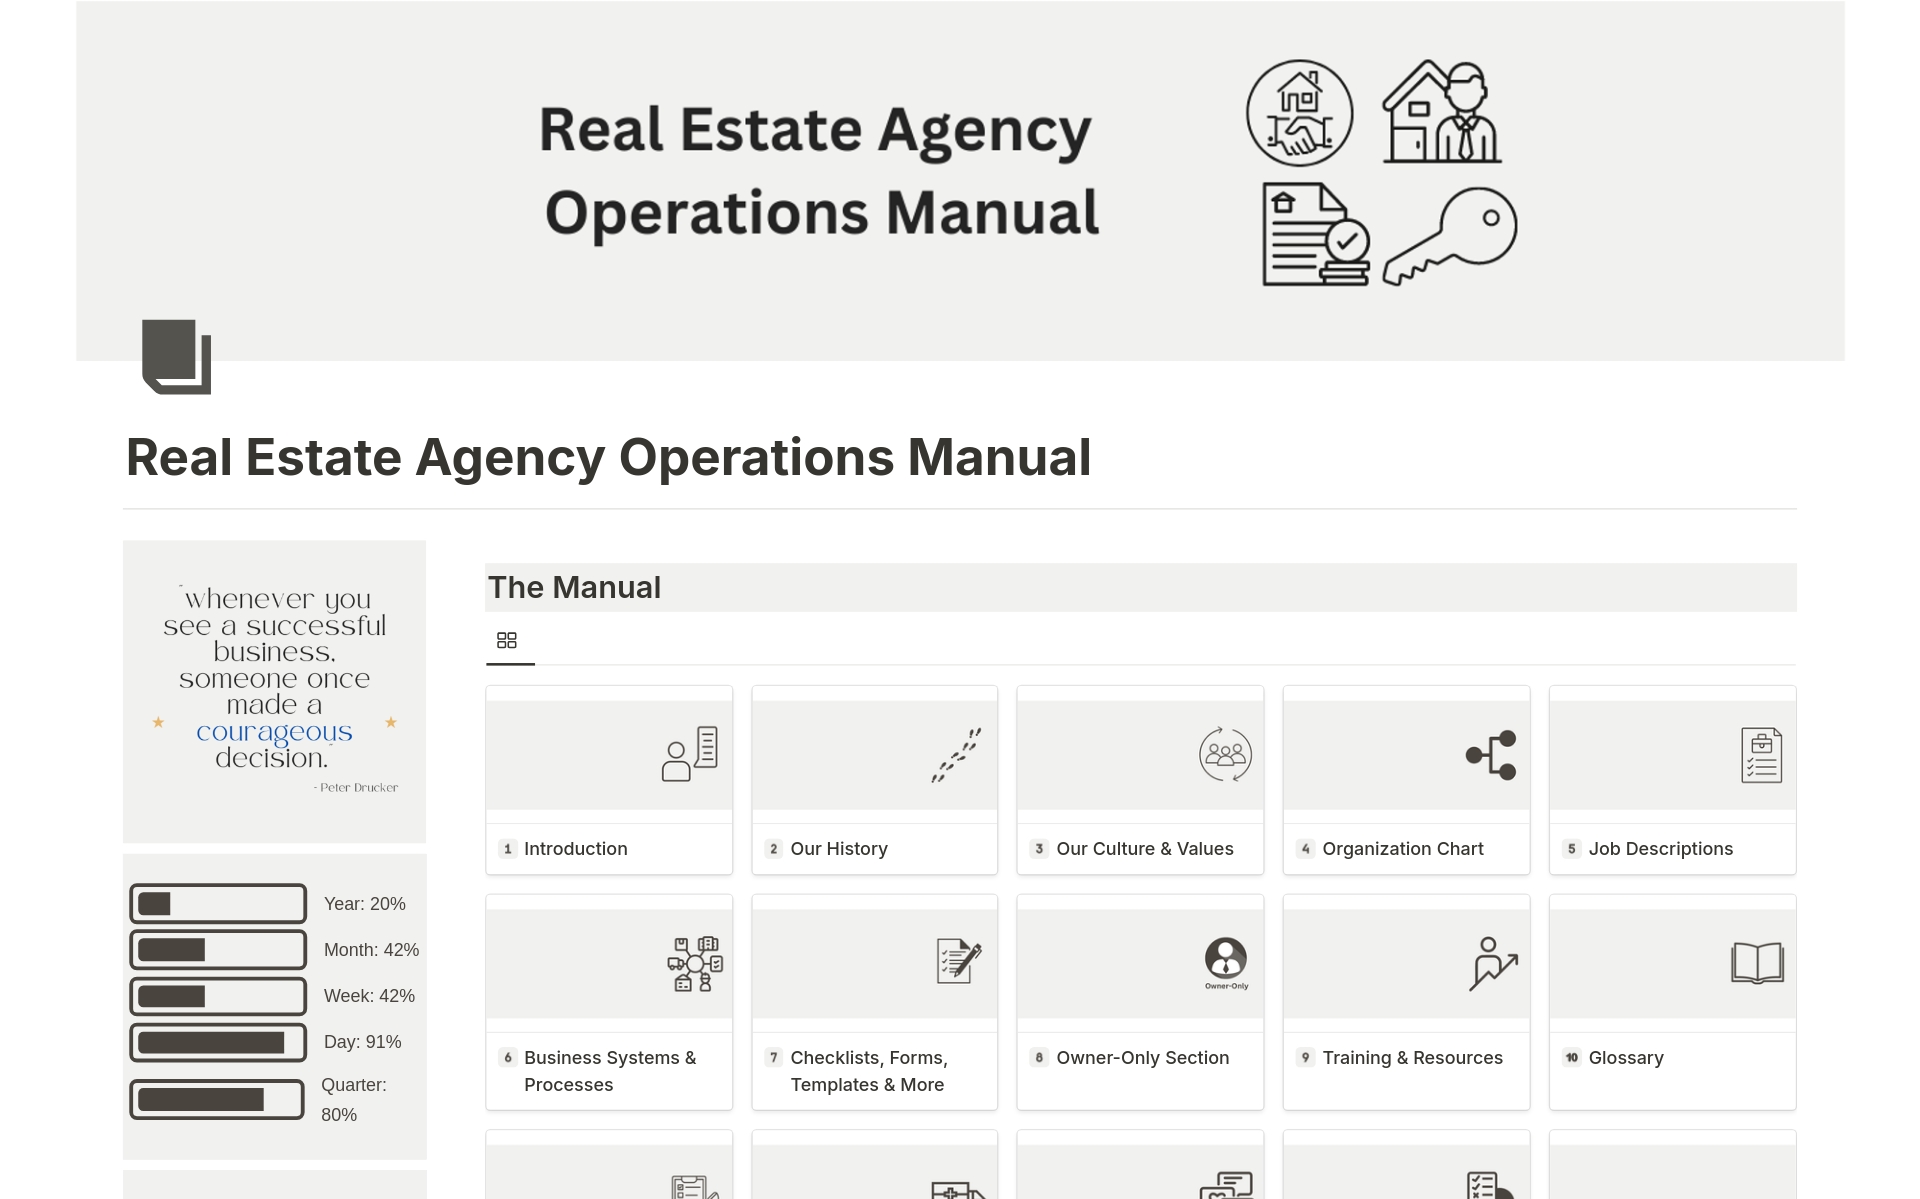 Ready-made operating manual designed for real estate agency owners who desire a clean, organized, and easy-to-navigate single source of knowledge for their business. 60+ sections pre-built & customizable. Get organized and streamlined by centralizing your business' knowledge hub.